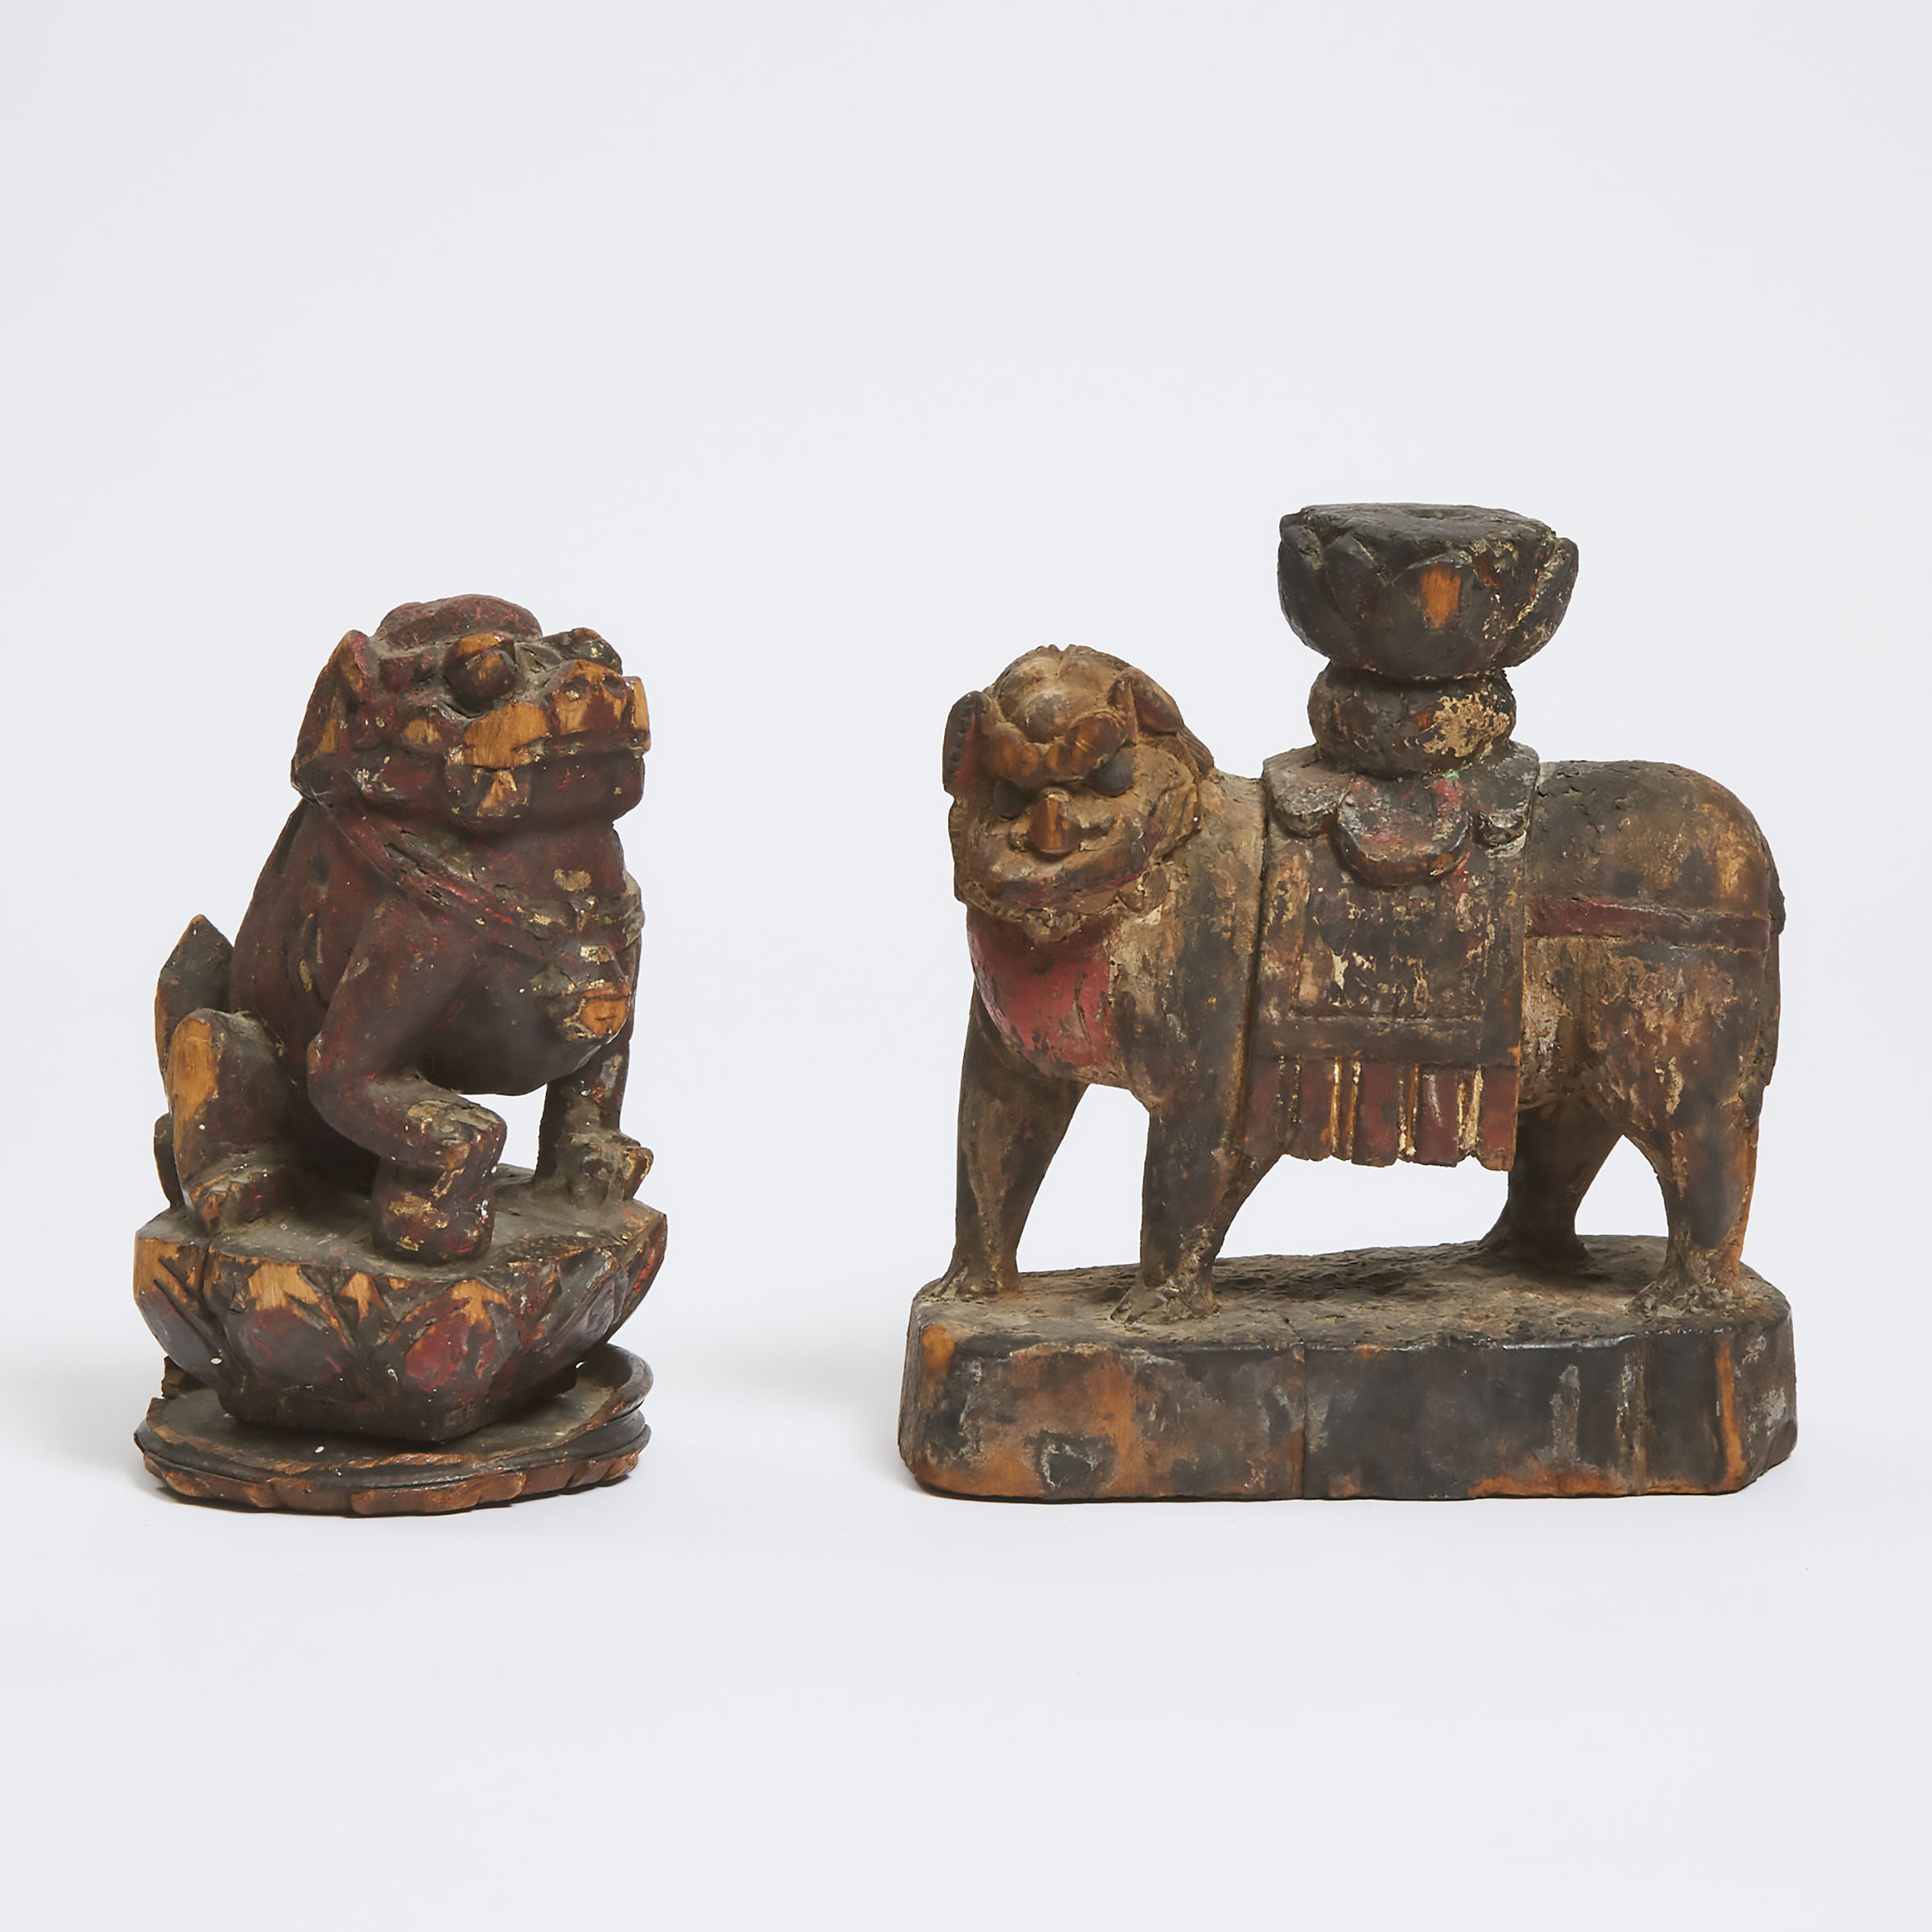 Two Gilt Wood Figures of Lions,